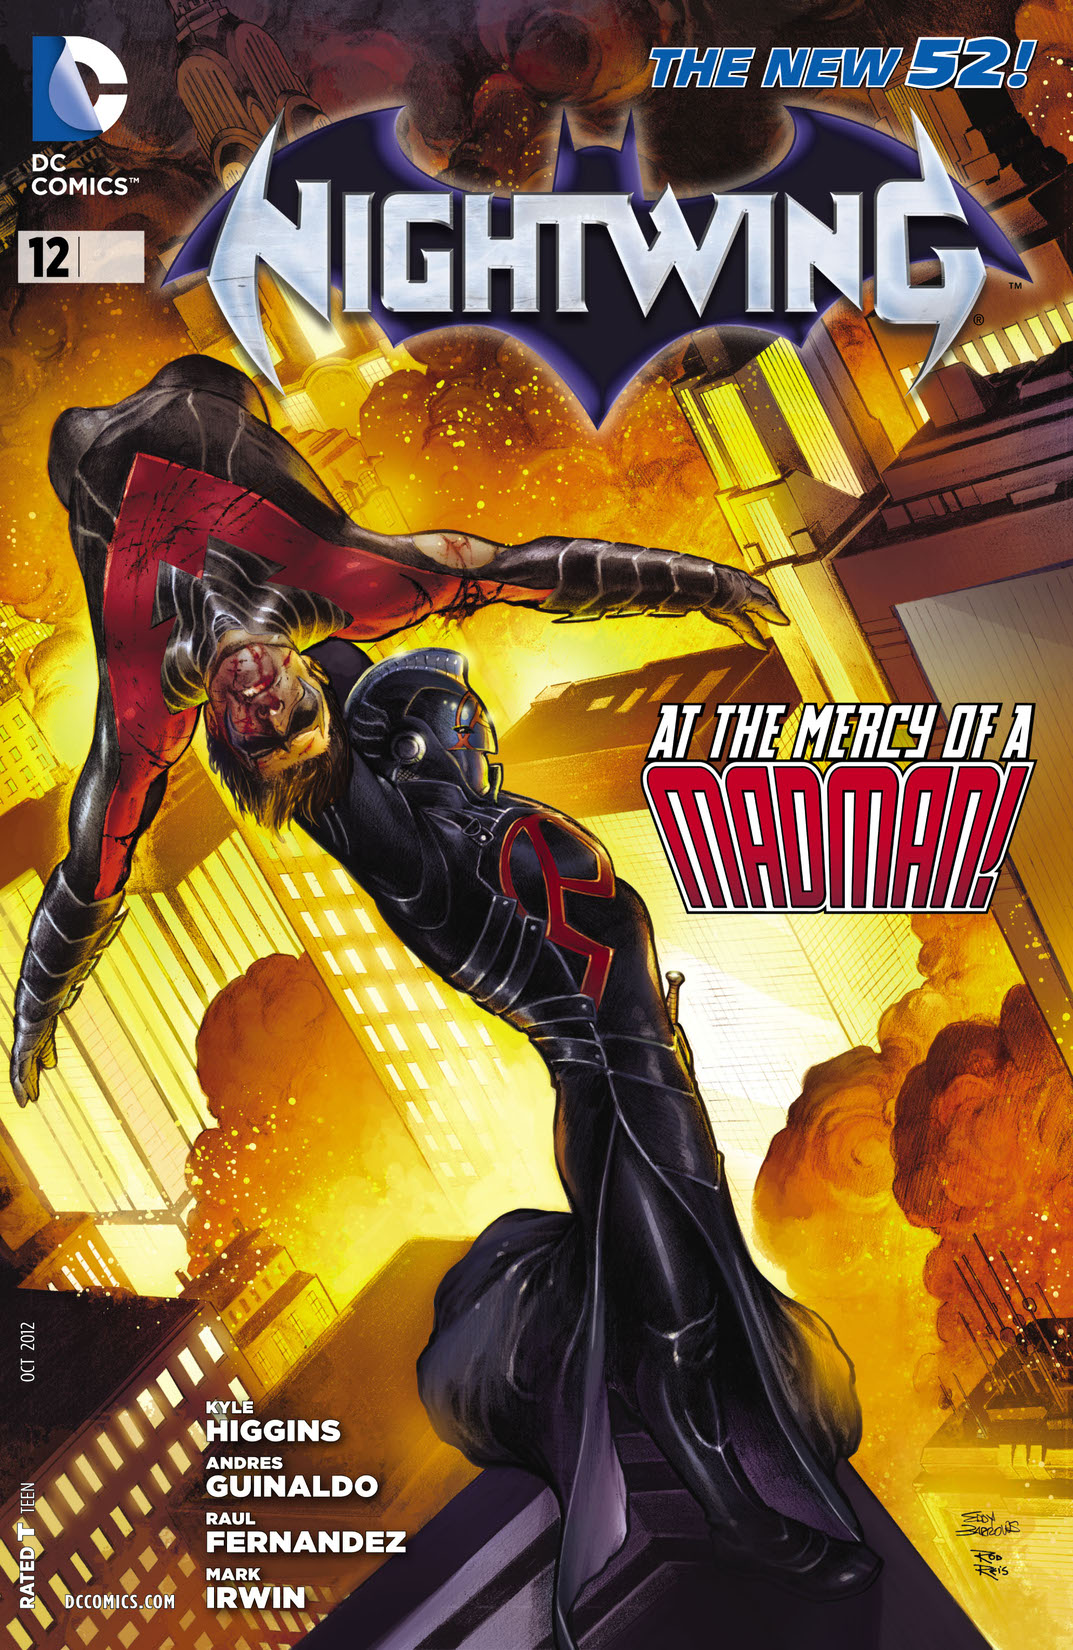 Nightwing (2011-) #12 preview images